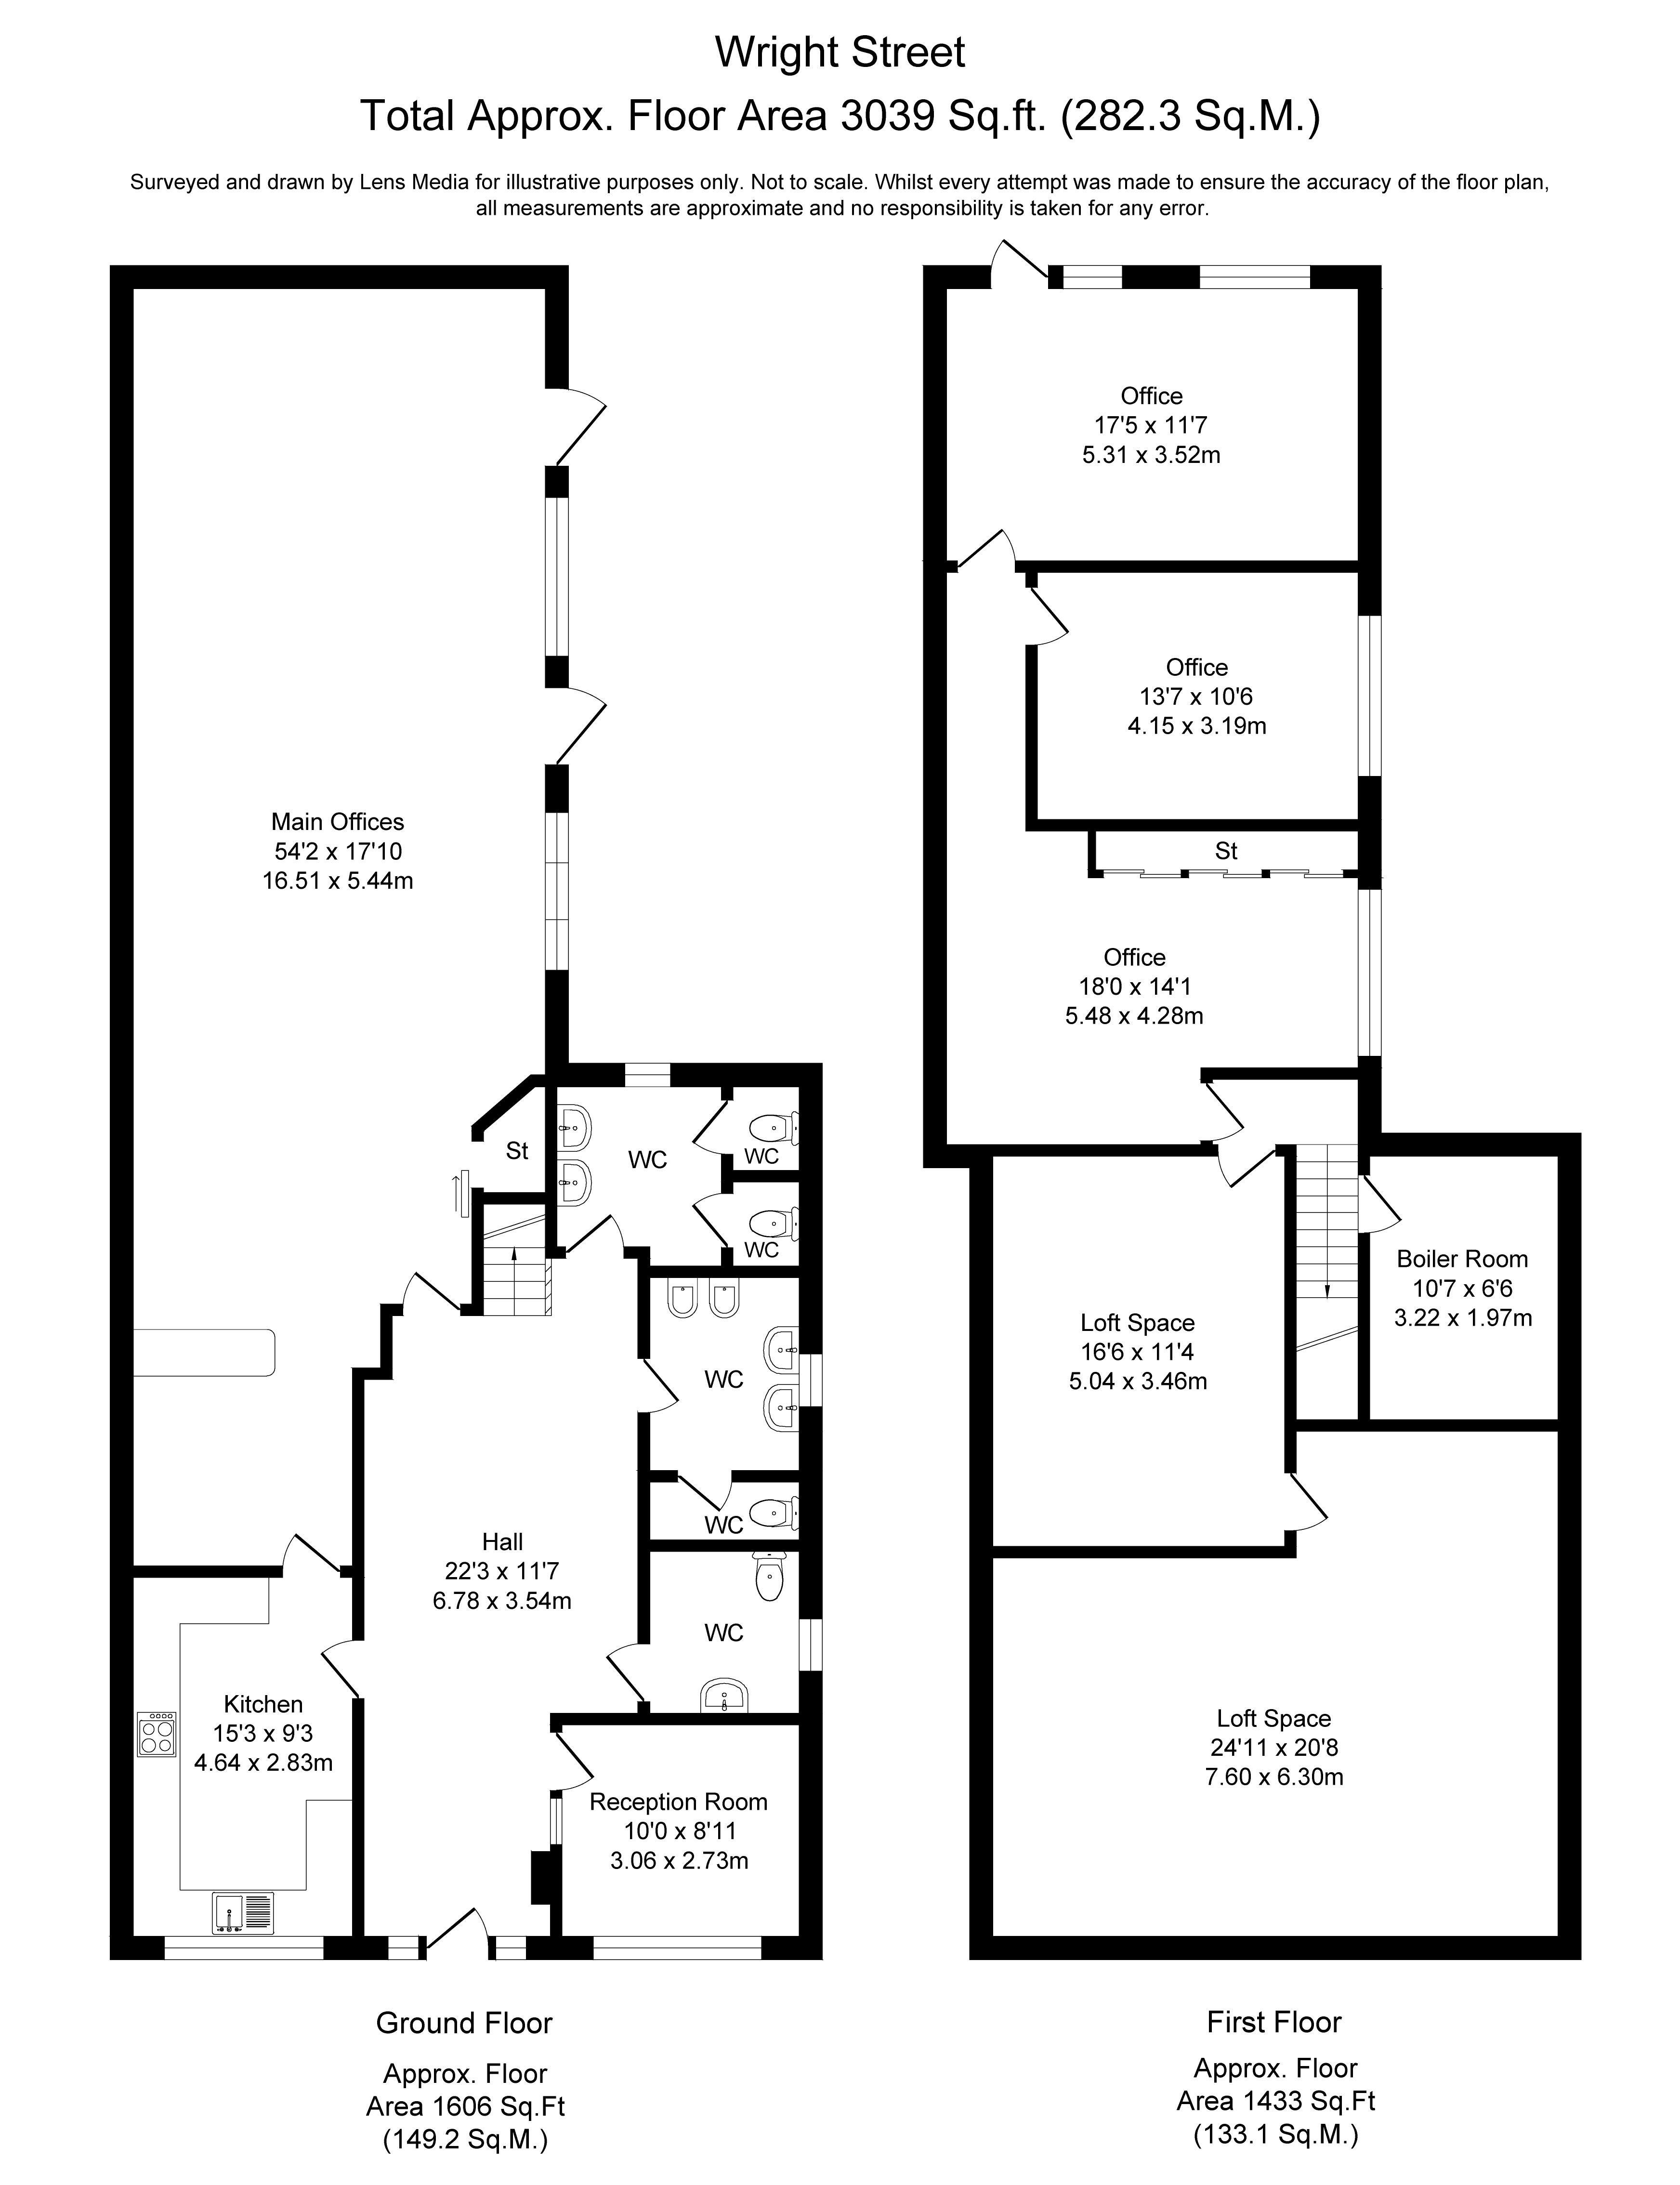 Floorplans For Wright Street, Southport - Town Centre